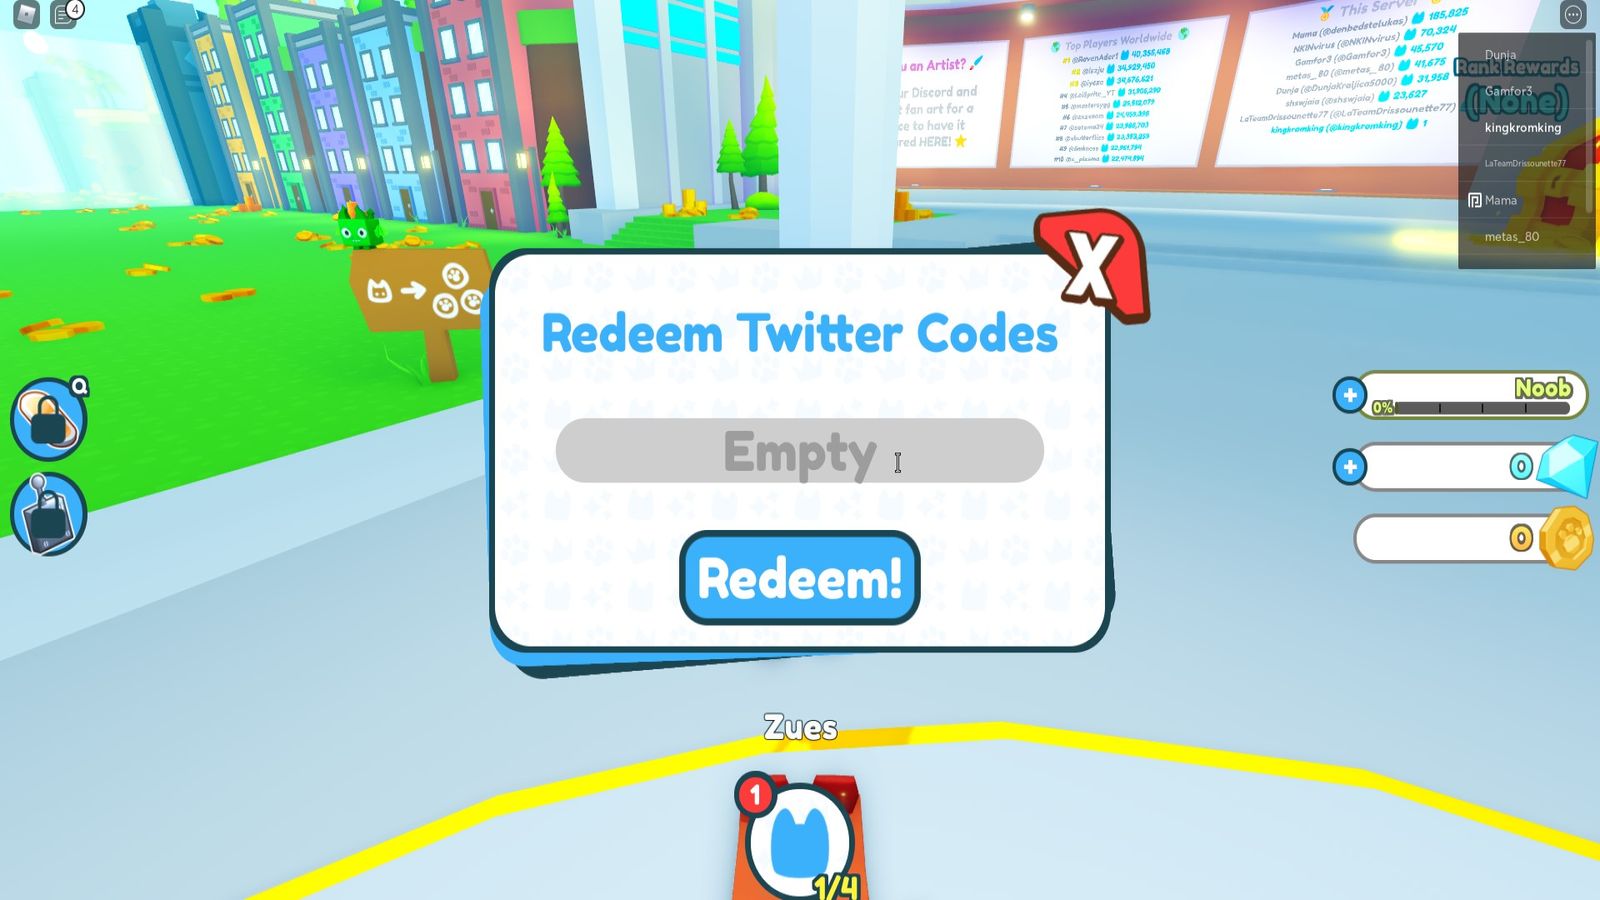 The Pet Simulator X code redemption screen in-game